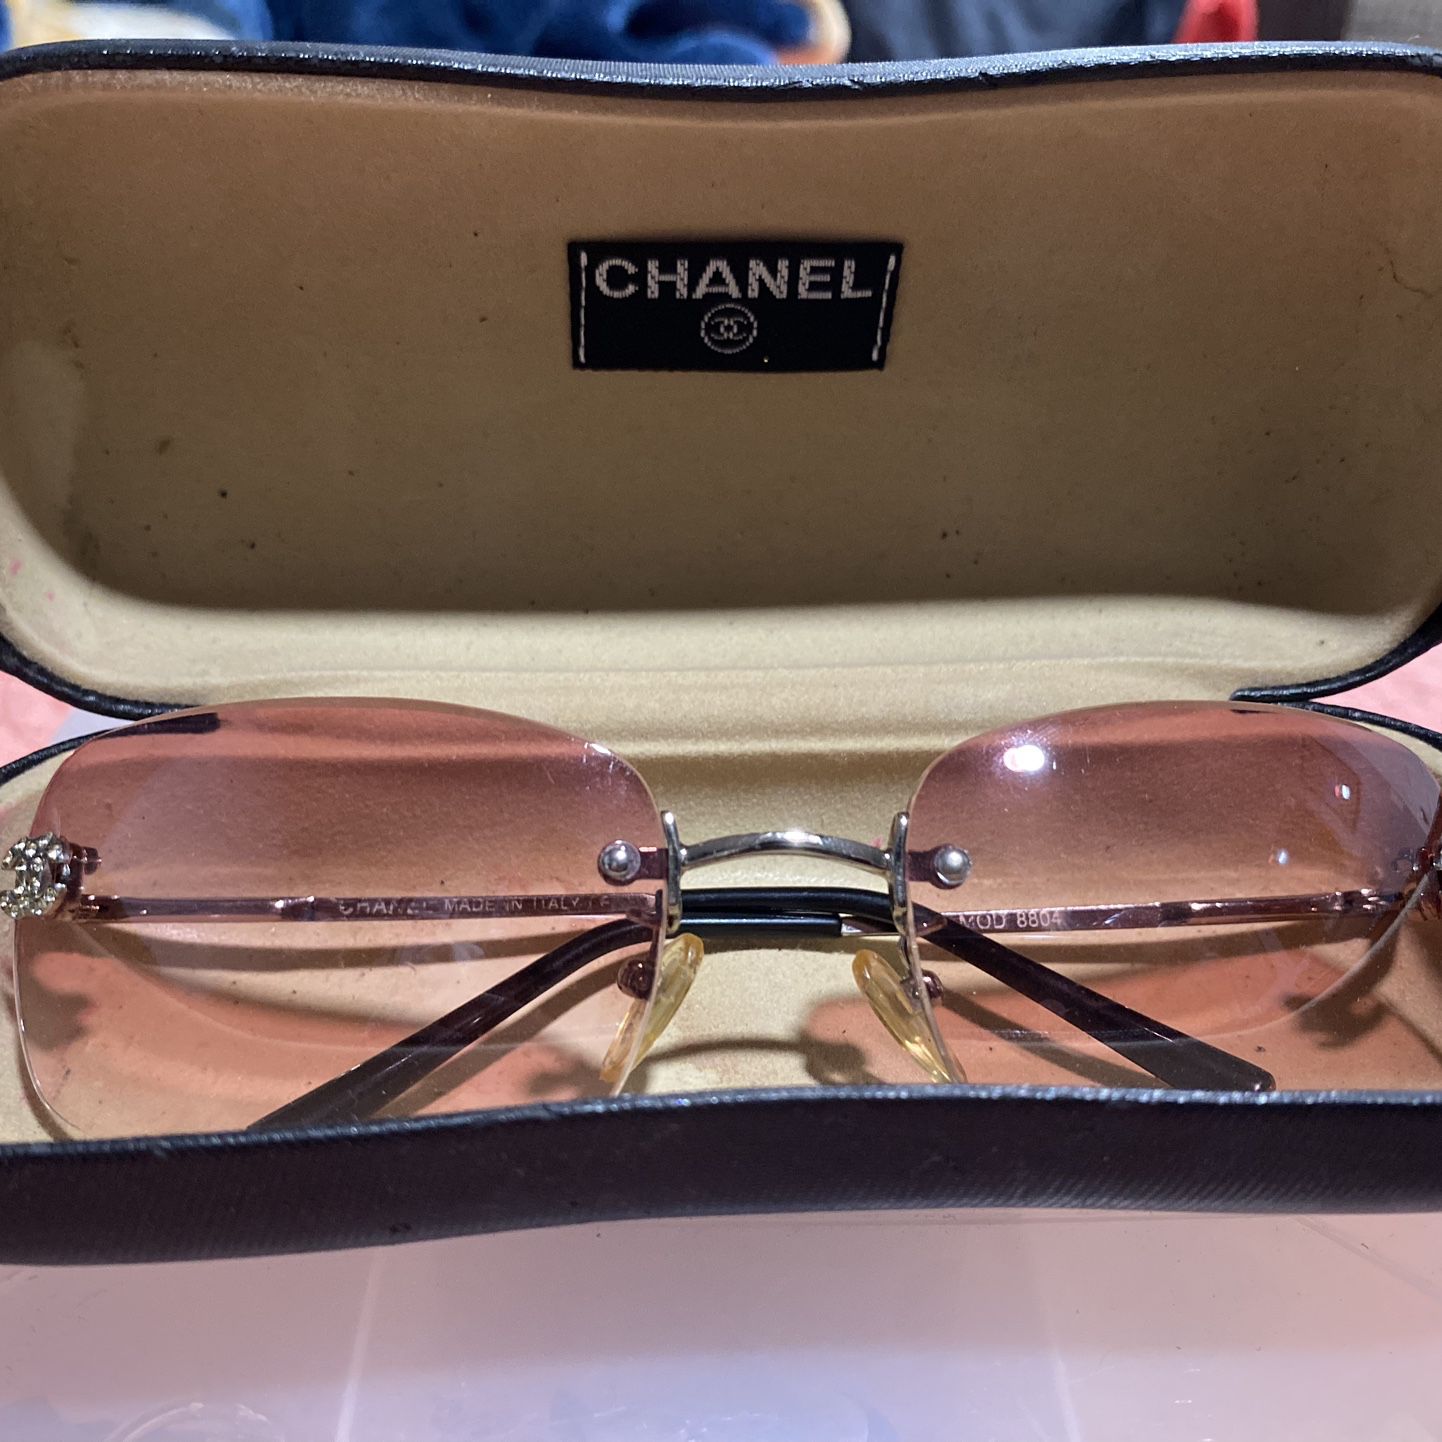 CHANEL Sunglasses for sale in Houston, Texas